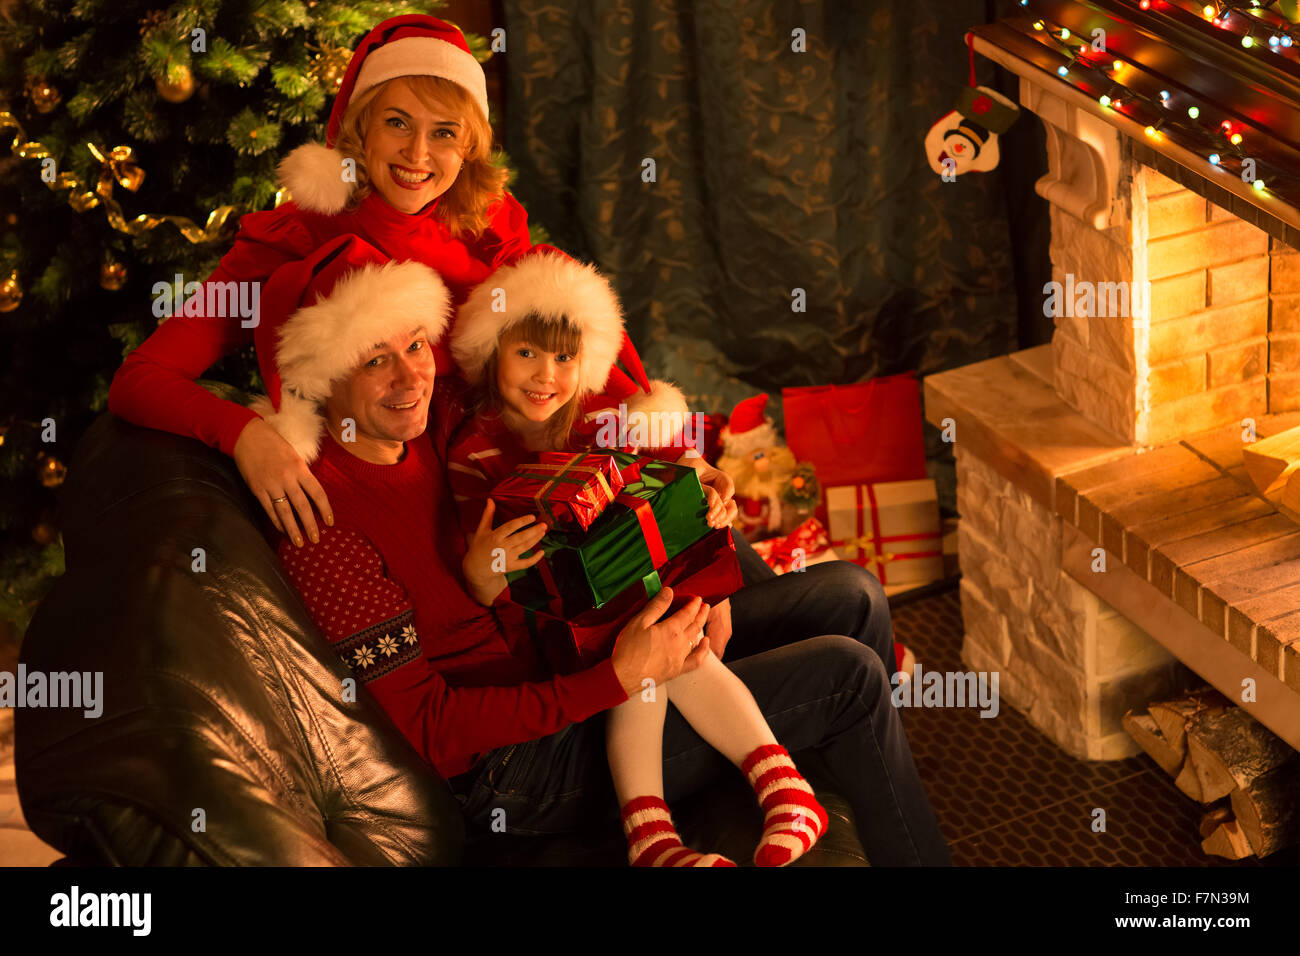 Happy family in red hats with gifts sitting at Christmas tree near fireplace Stock Photo